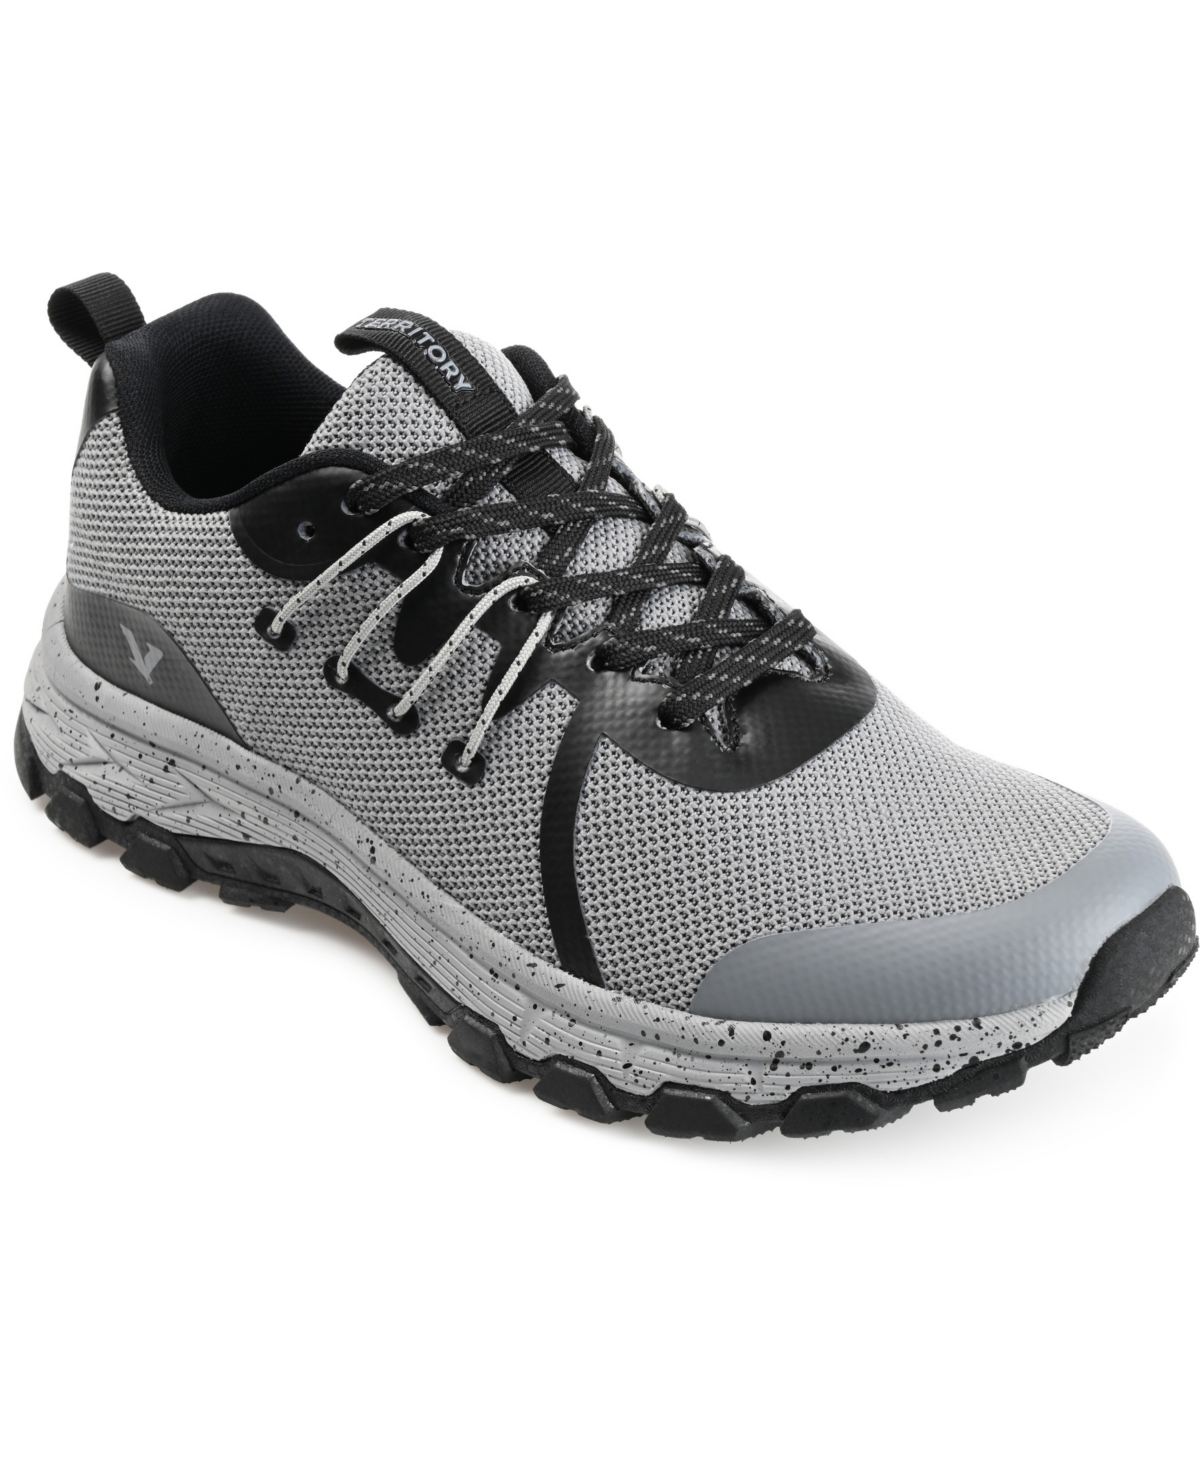 Men's Mohave Knit Trail Sneakers - Gray